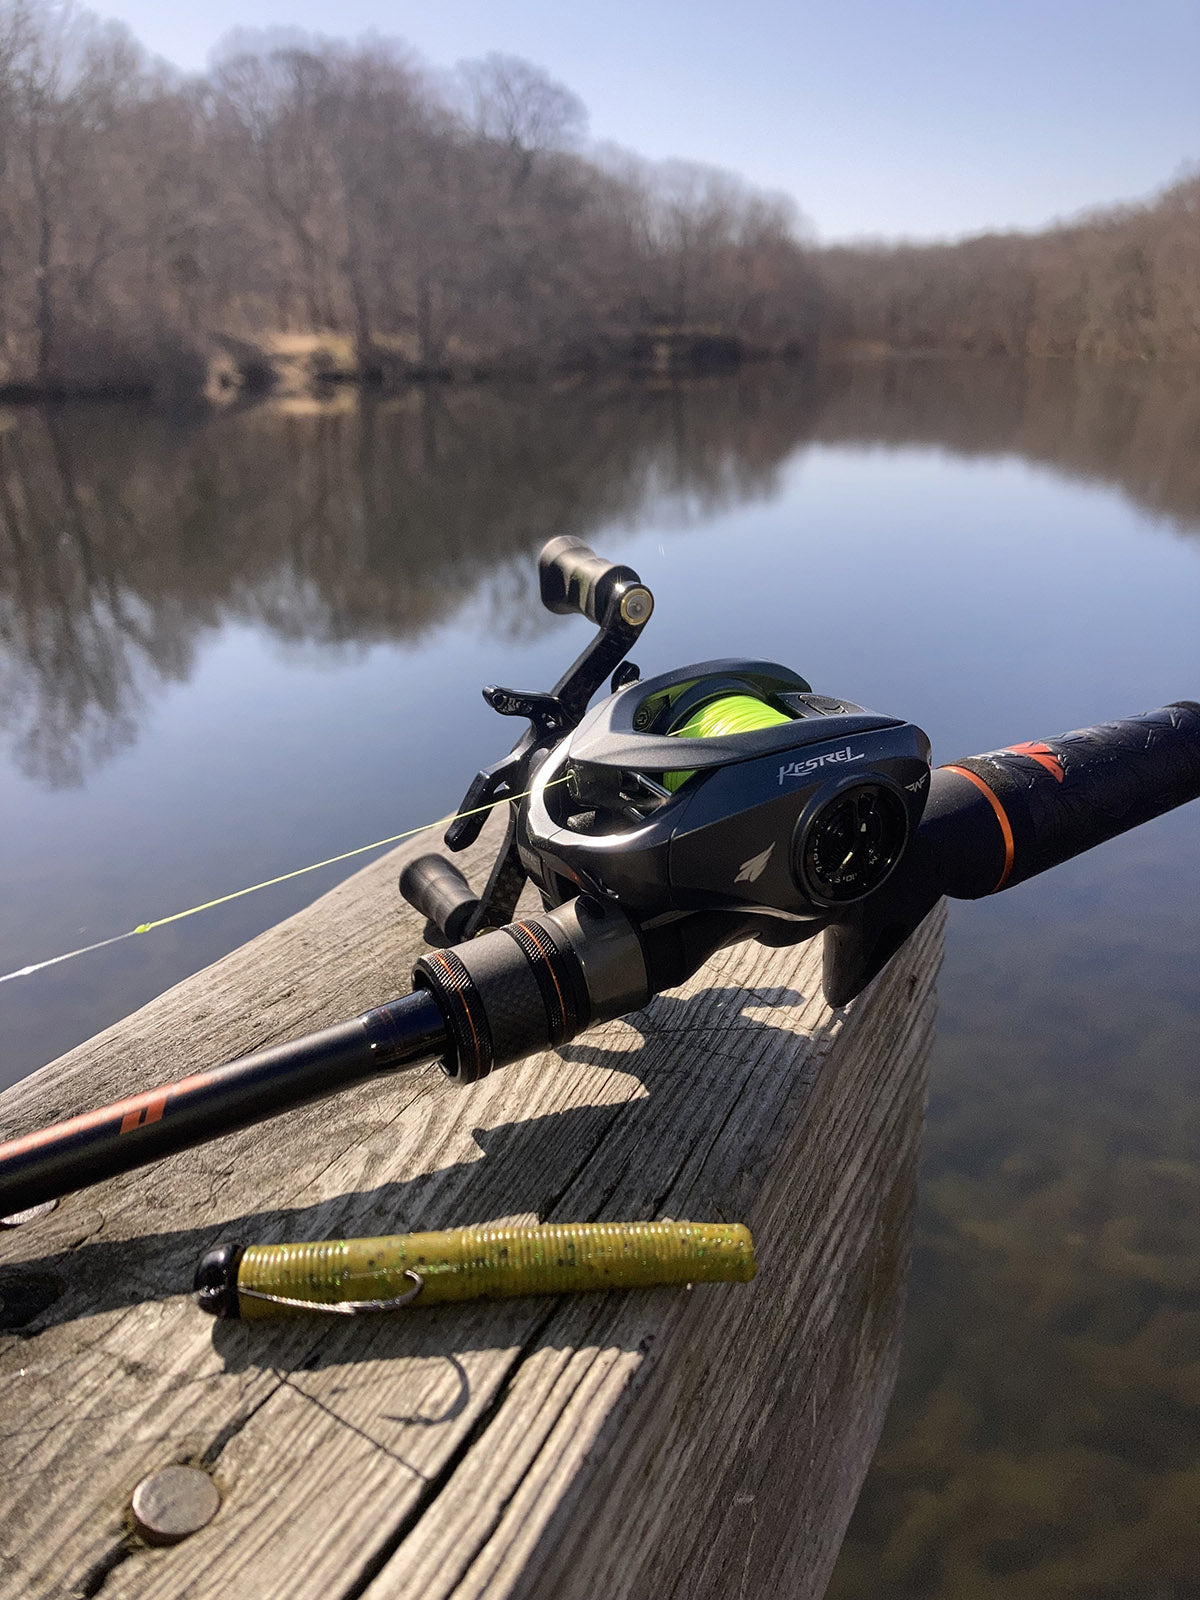 Buyer's Guide: BFS (Bait Finesse System) Rod and Reel Combos